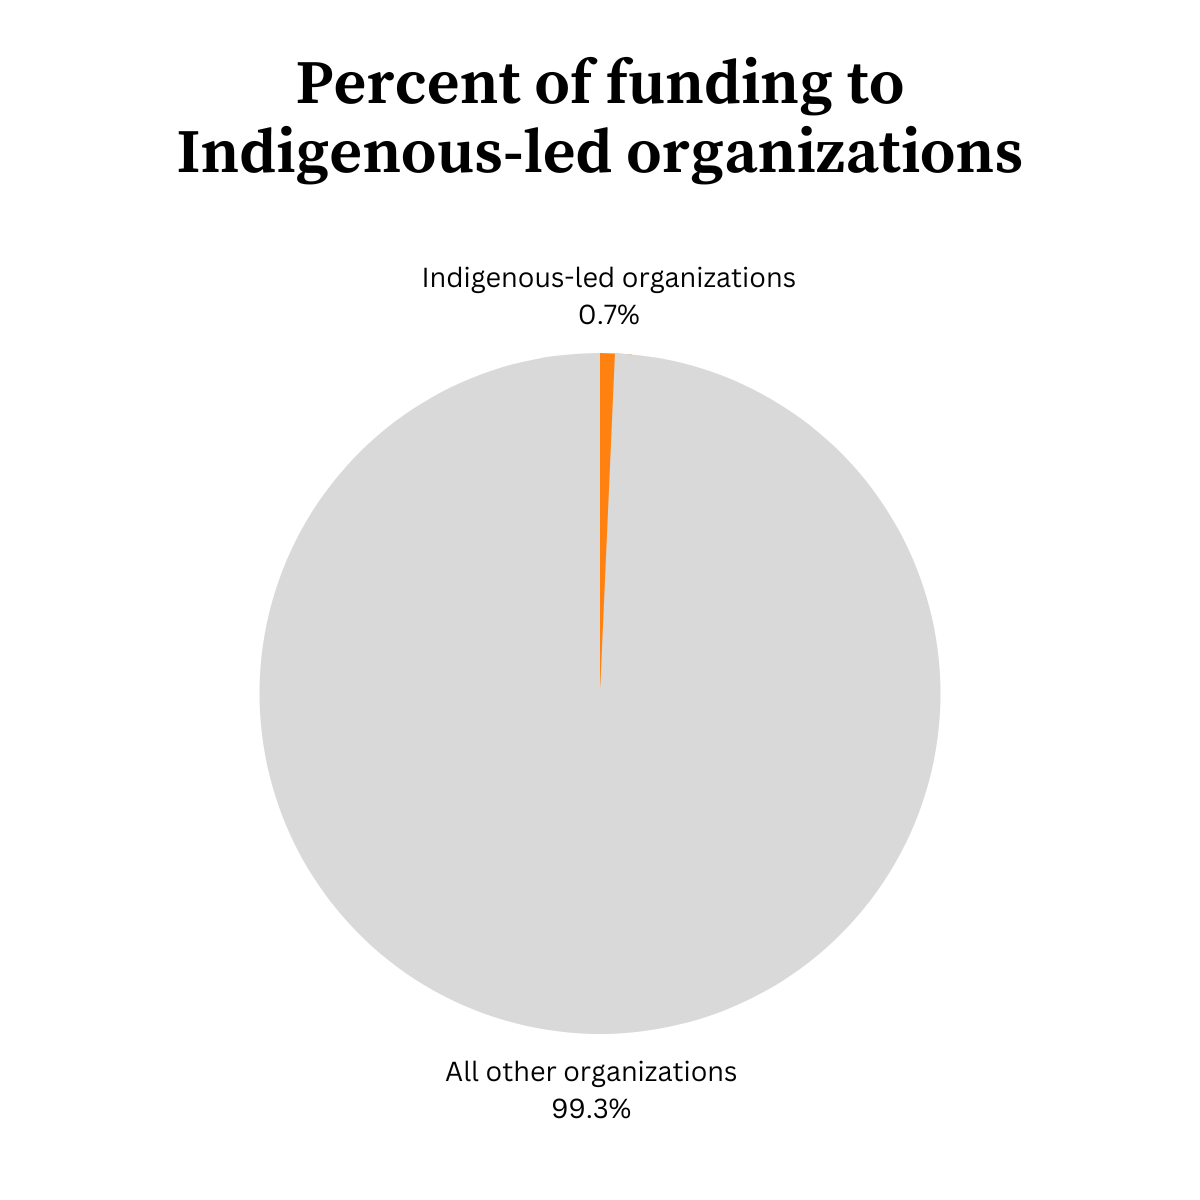 Pie chart showing the percent of funding to Indigenous-led organizations, which is 0.7% for Indigenous-led organizations and 99.3% to all other organizations